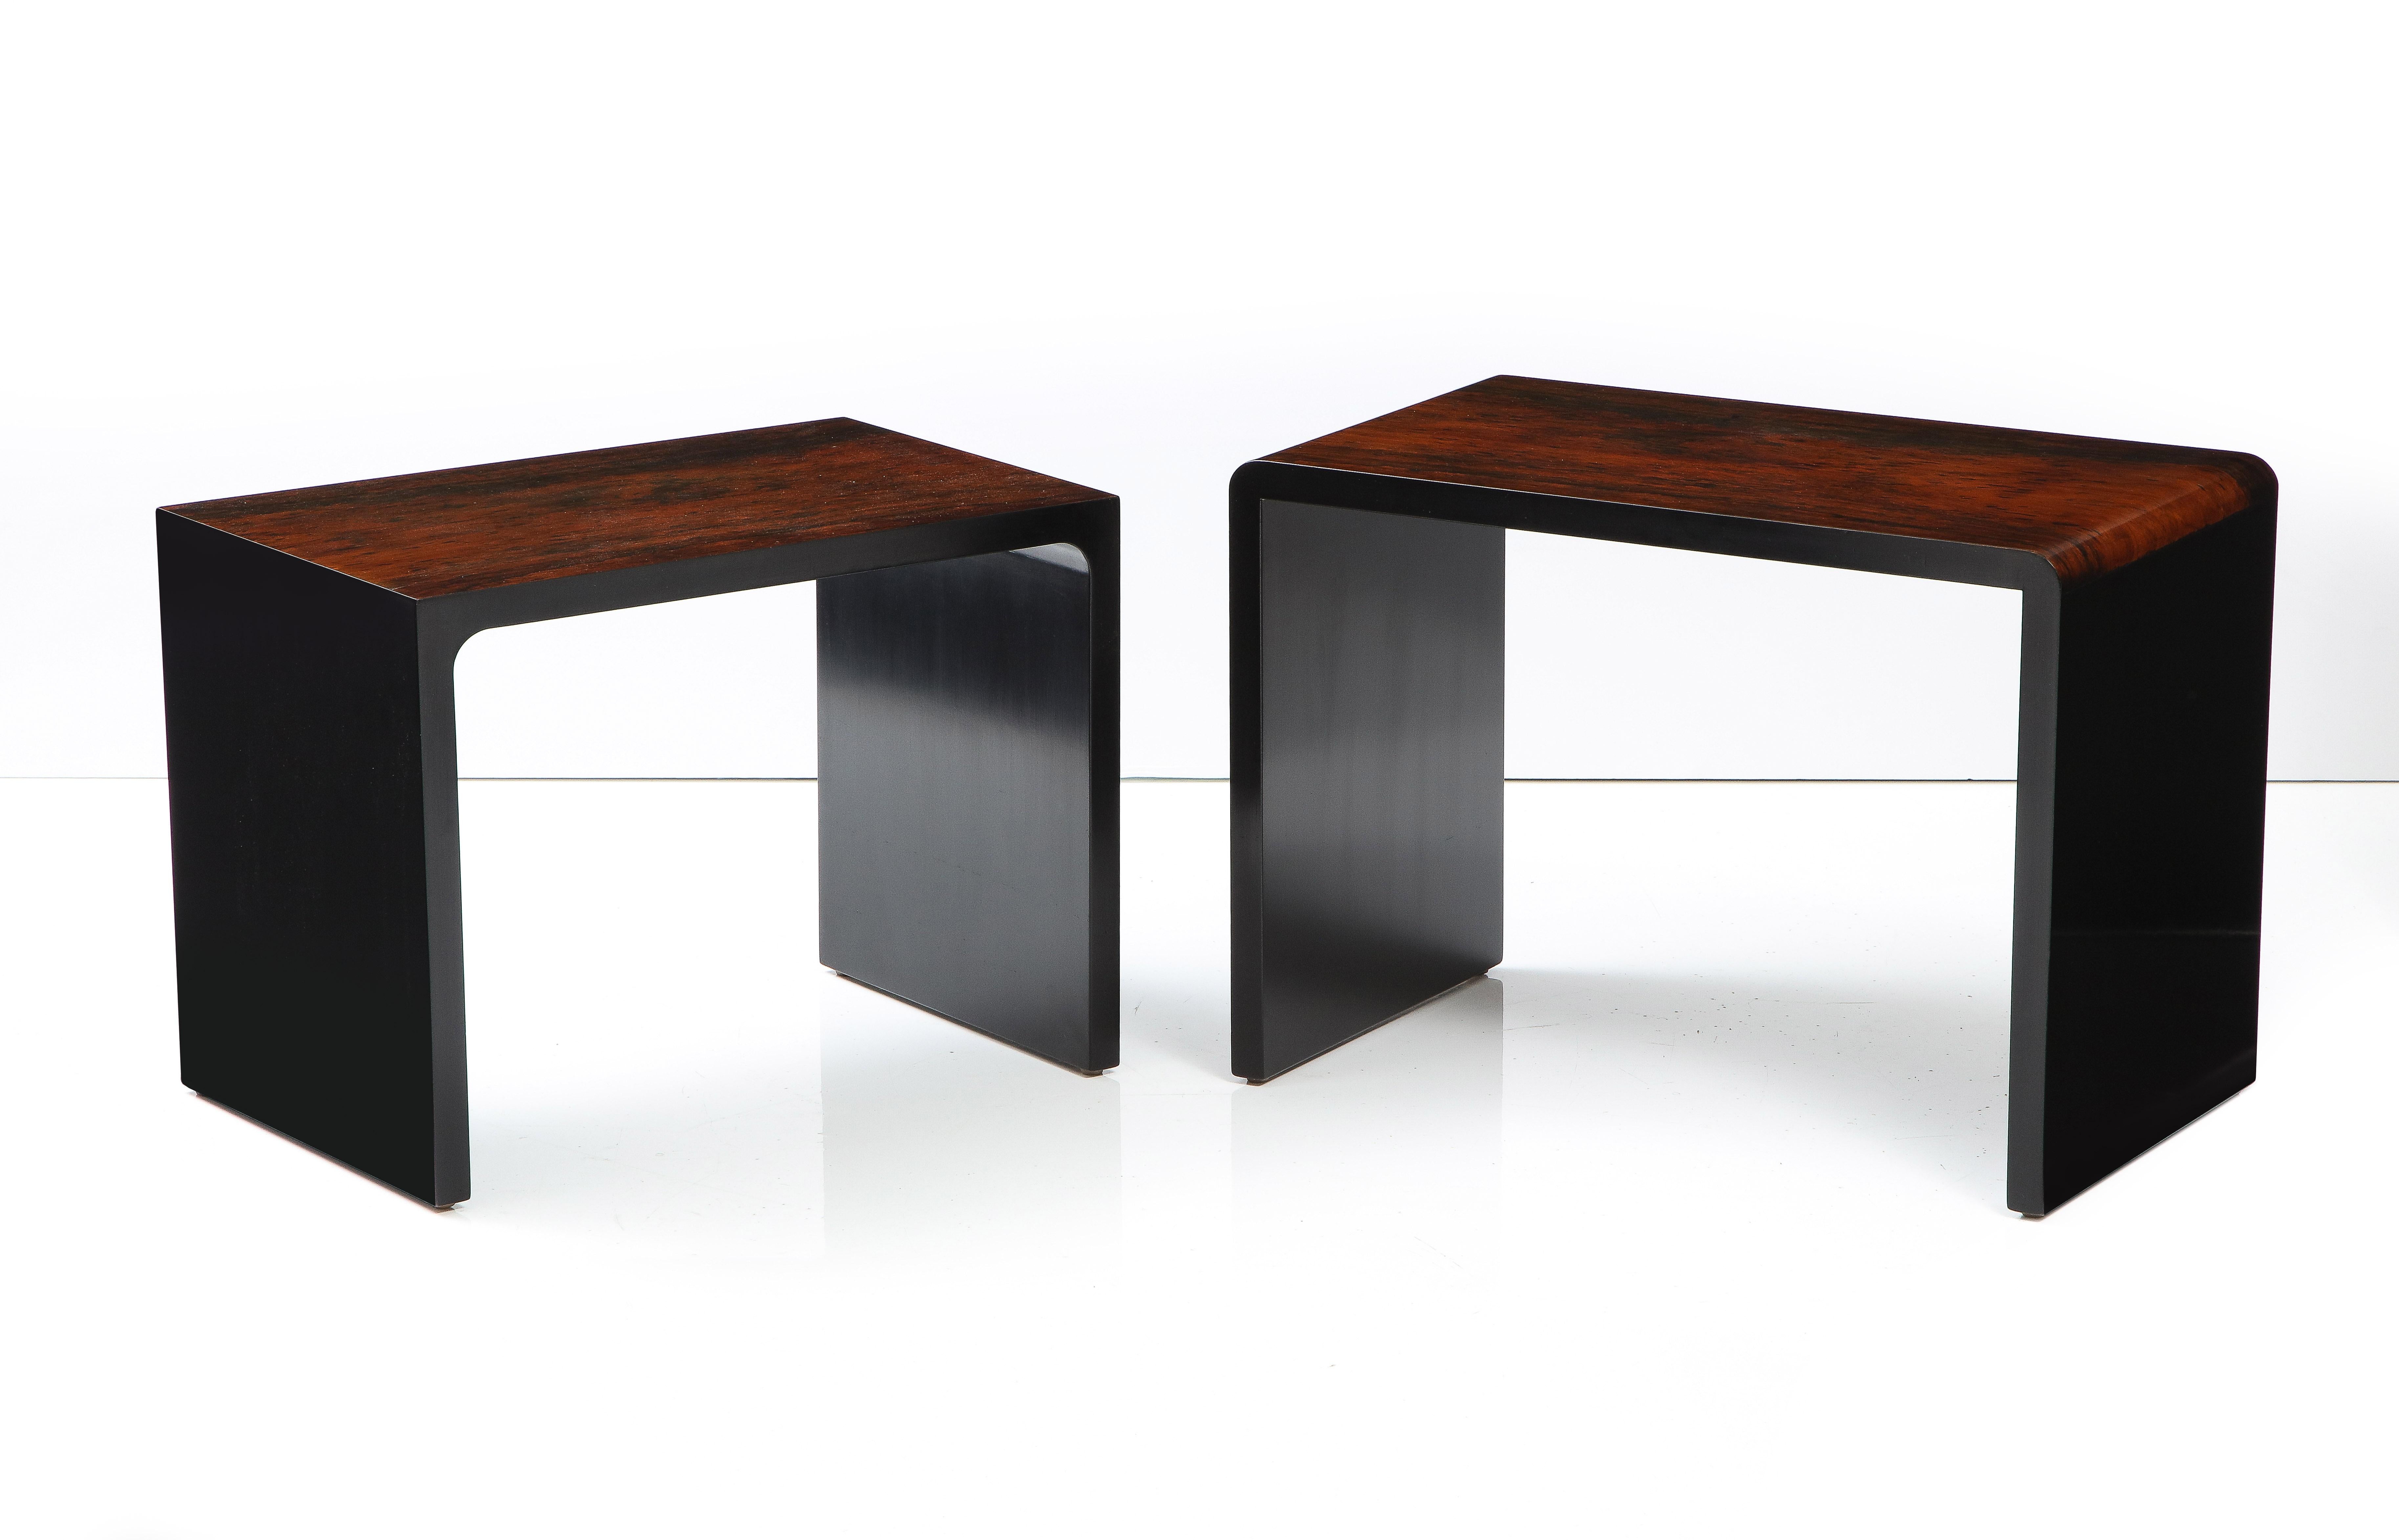 Set of Italian Rosewood and Ebony Lacquered Nesting Tables, circa 1970 For Sale 4